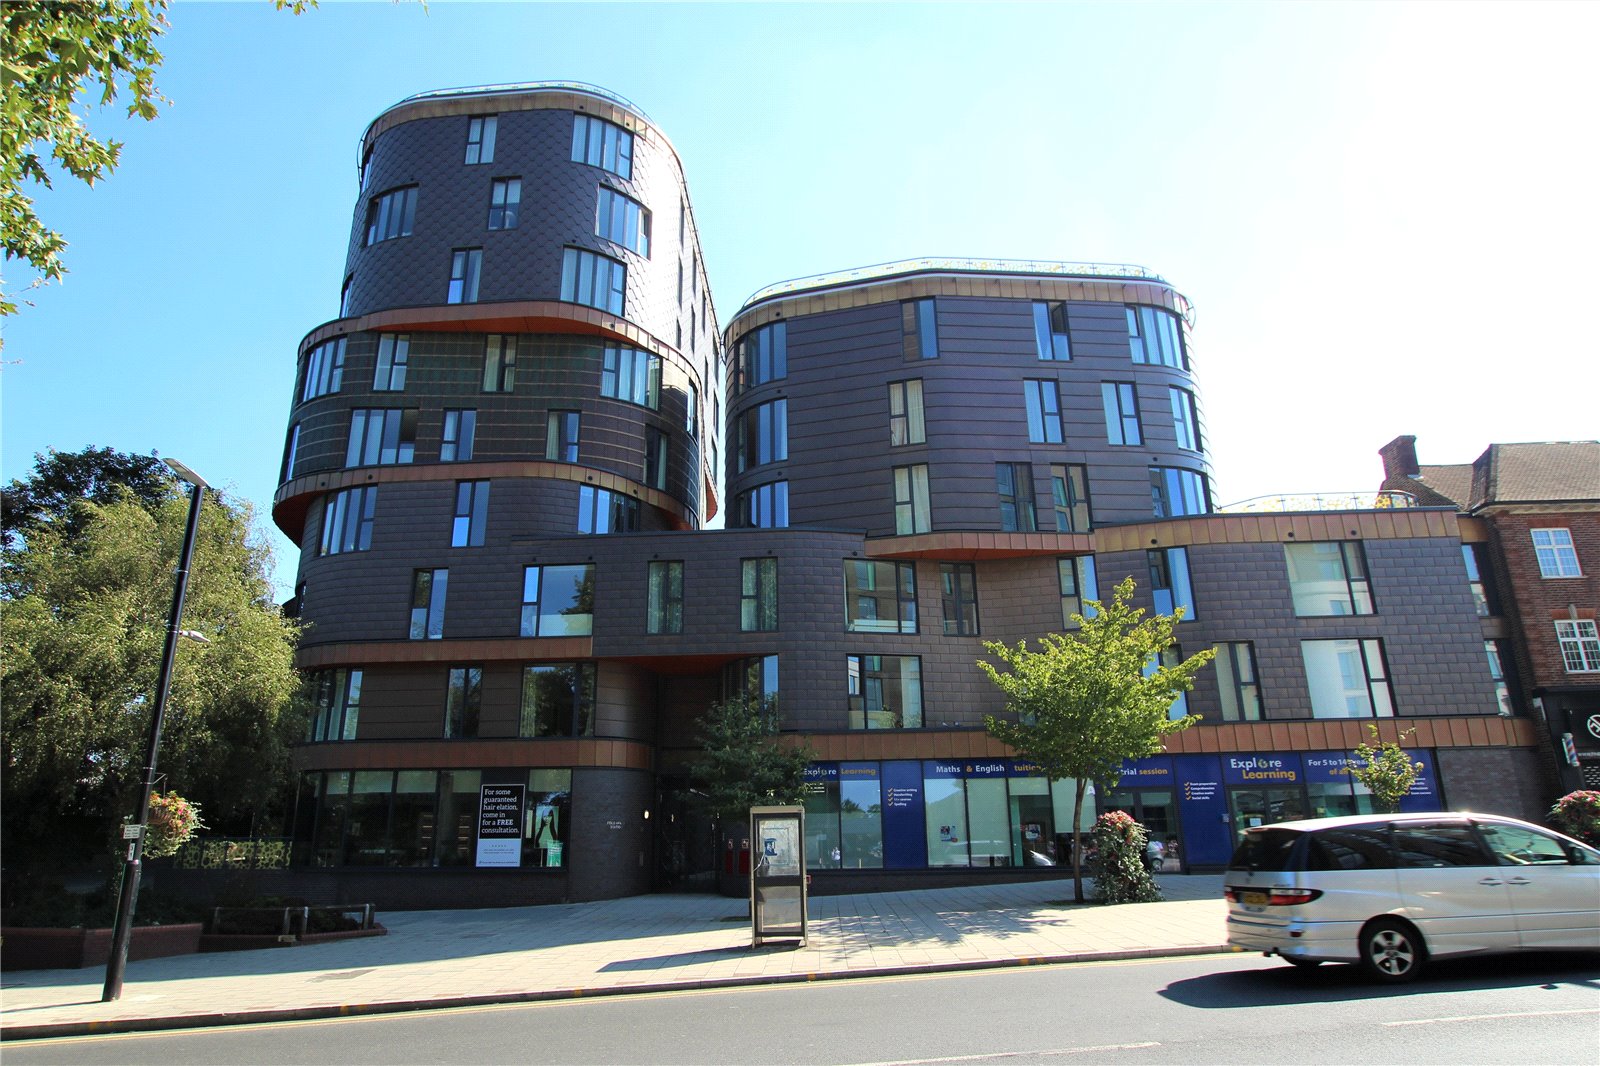 The Fold Apartments, Station Road, Sidcup, Kent, DA15